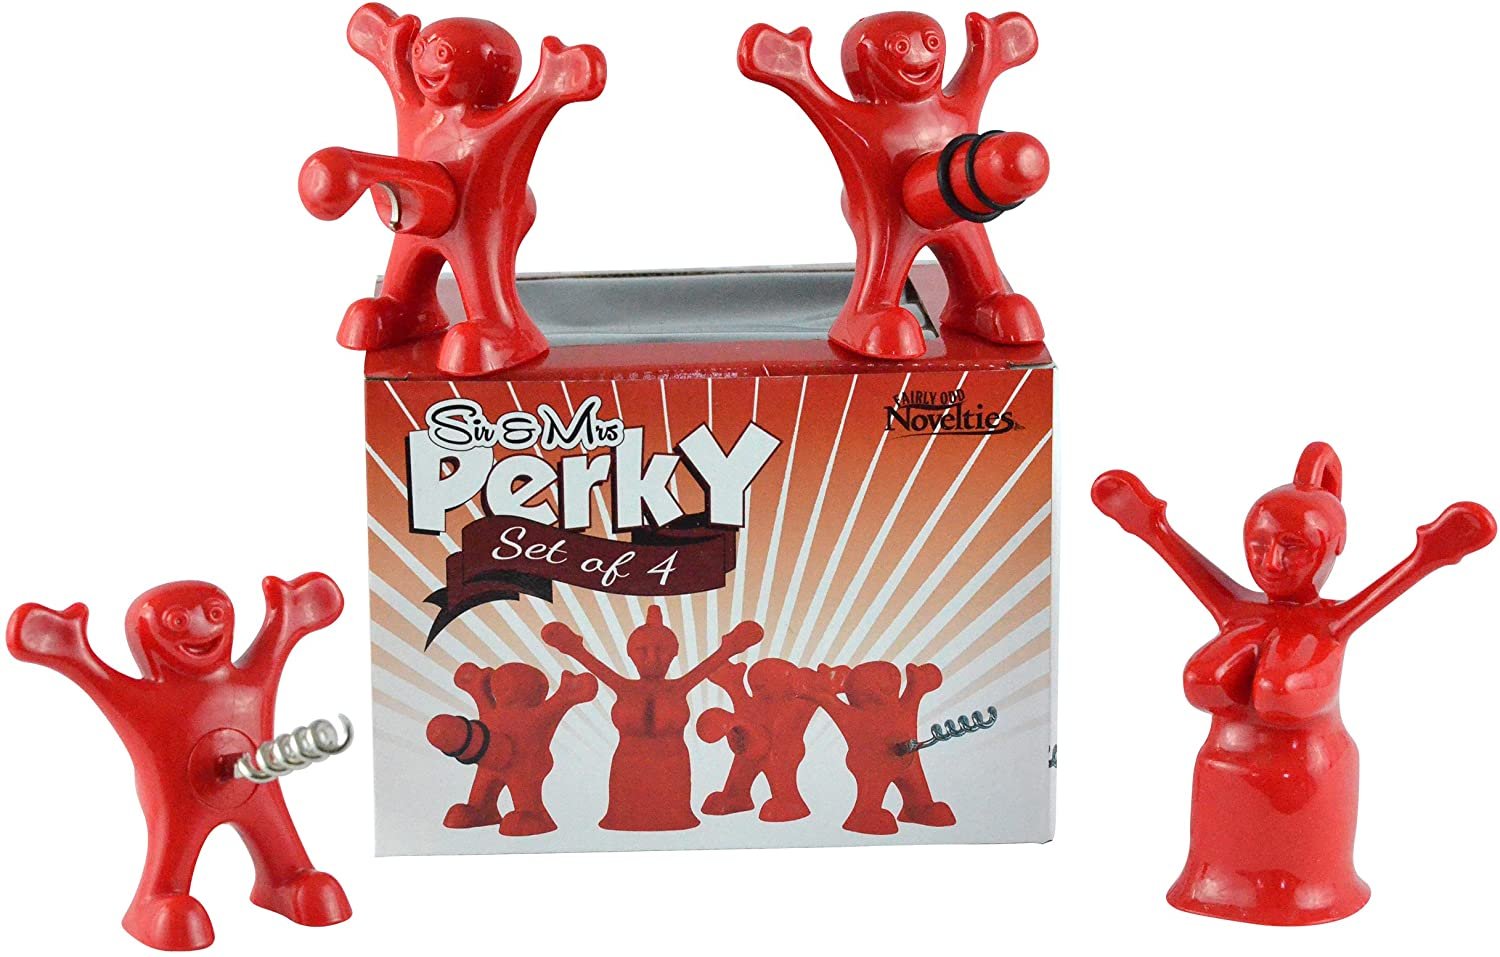 Fairly Odd Novelties Sir Perky and Mrs Perky Ultimate Complete Pack